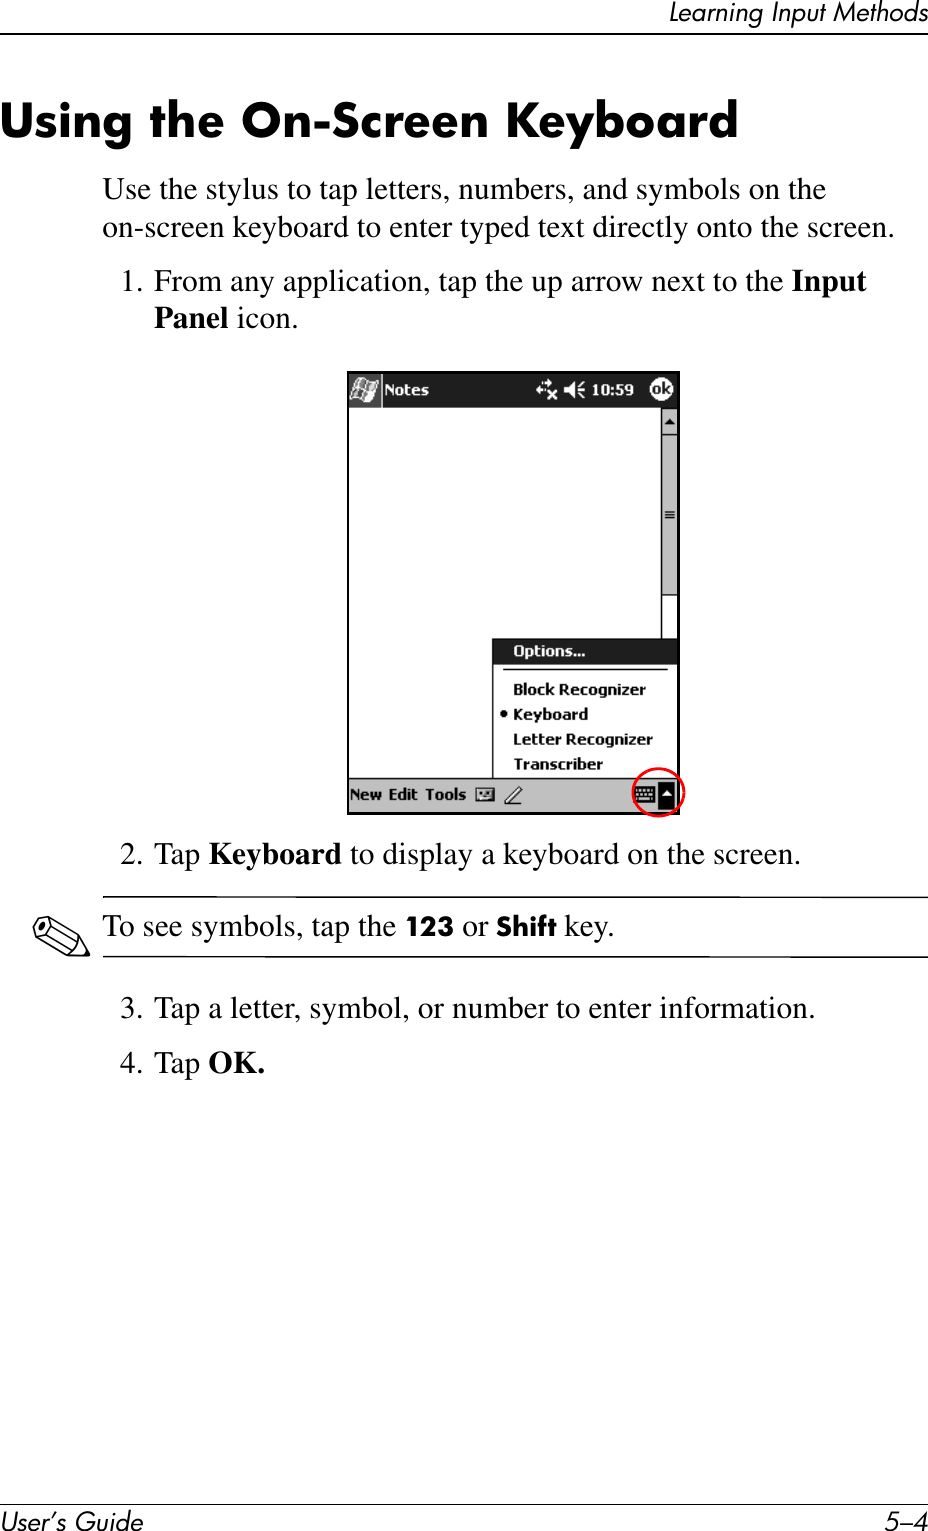 User’s Guide 5–4Learning Input MethodsUsing the On-Screen KeyboardUse the stylus to tap letters, numbers, and symbols on the on-screen keyboard to enter typed text directly onto the screen.1. From any application, tap the up arrow next to the Input Panel icon.2. Tap Keyboard to display a keyboard on the screen.✎To see symbols, tap the 123 or Shift key.3. Tap a letter, symbol, or number to enter information.4. Tap OK.